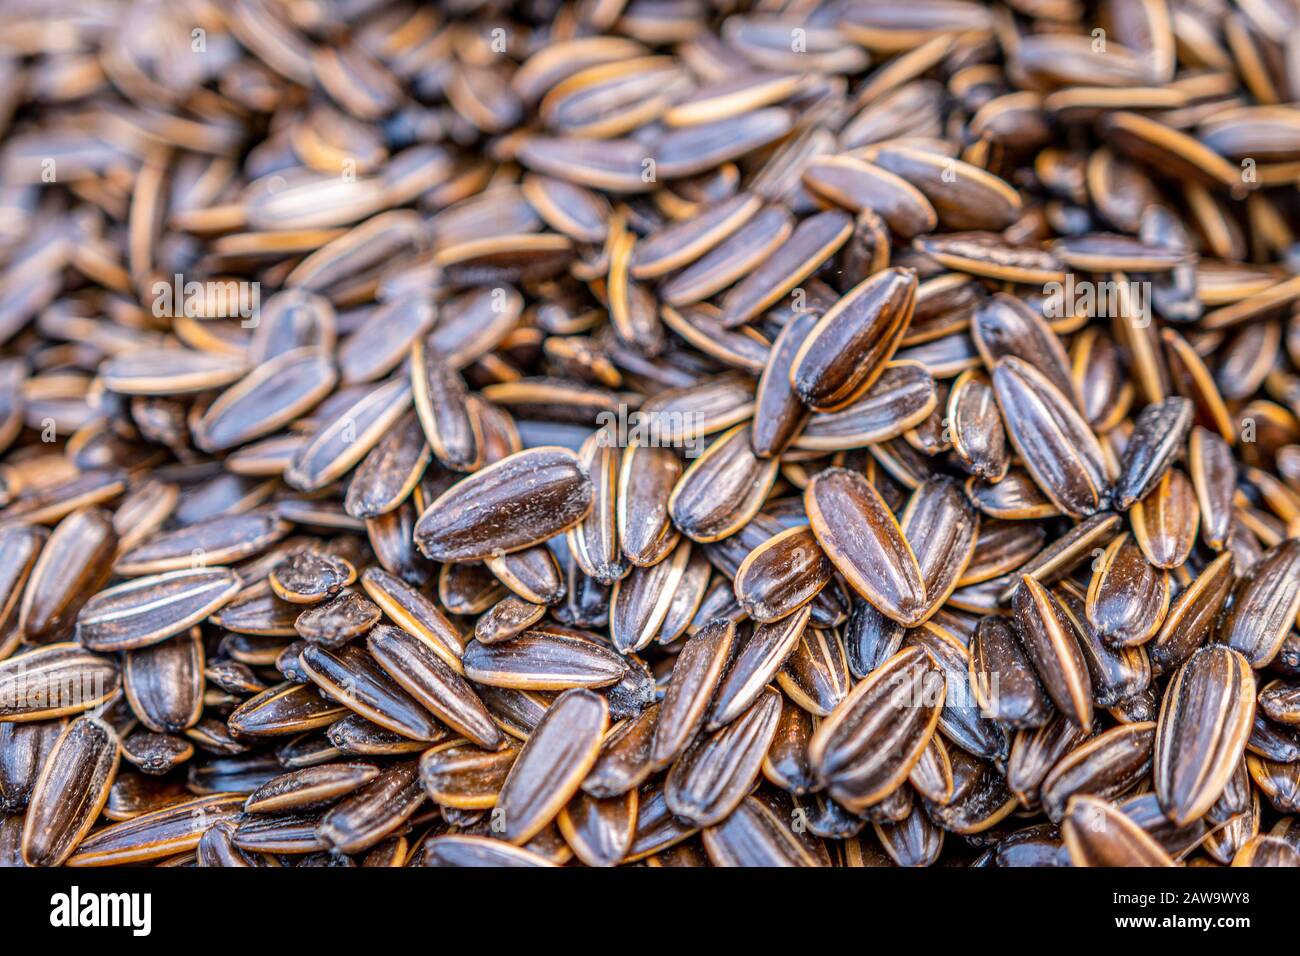 Organic, sweet and nutty sunflower seeds in shell Stock Photo